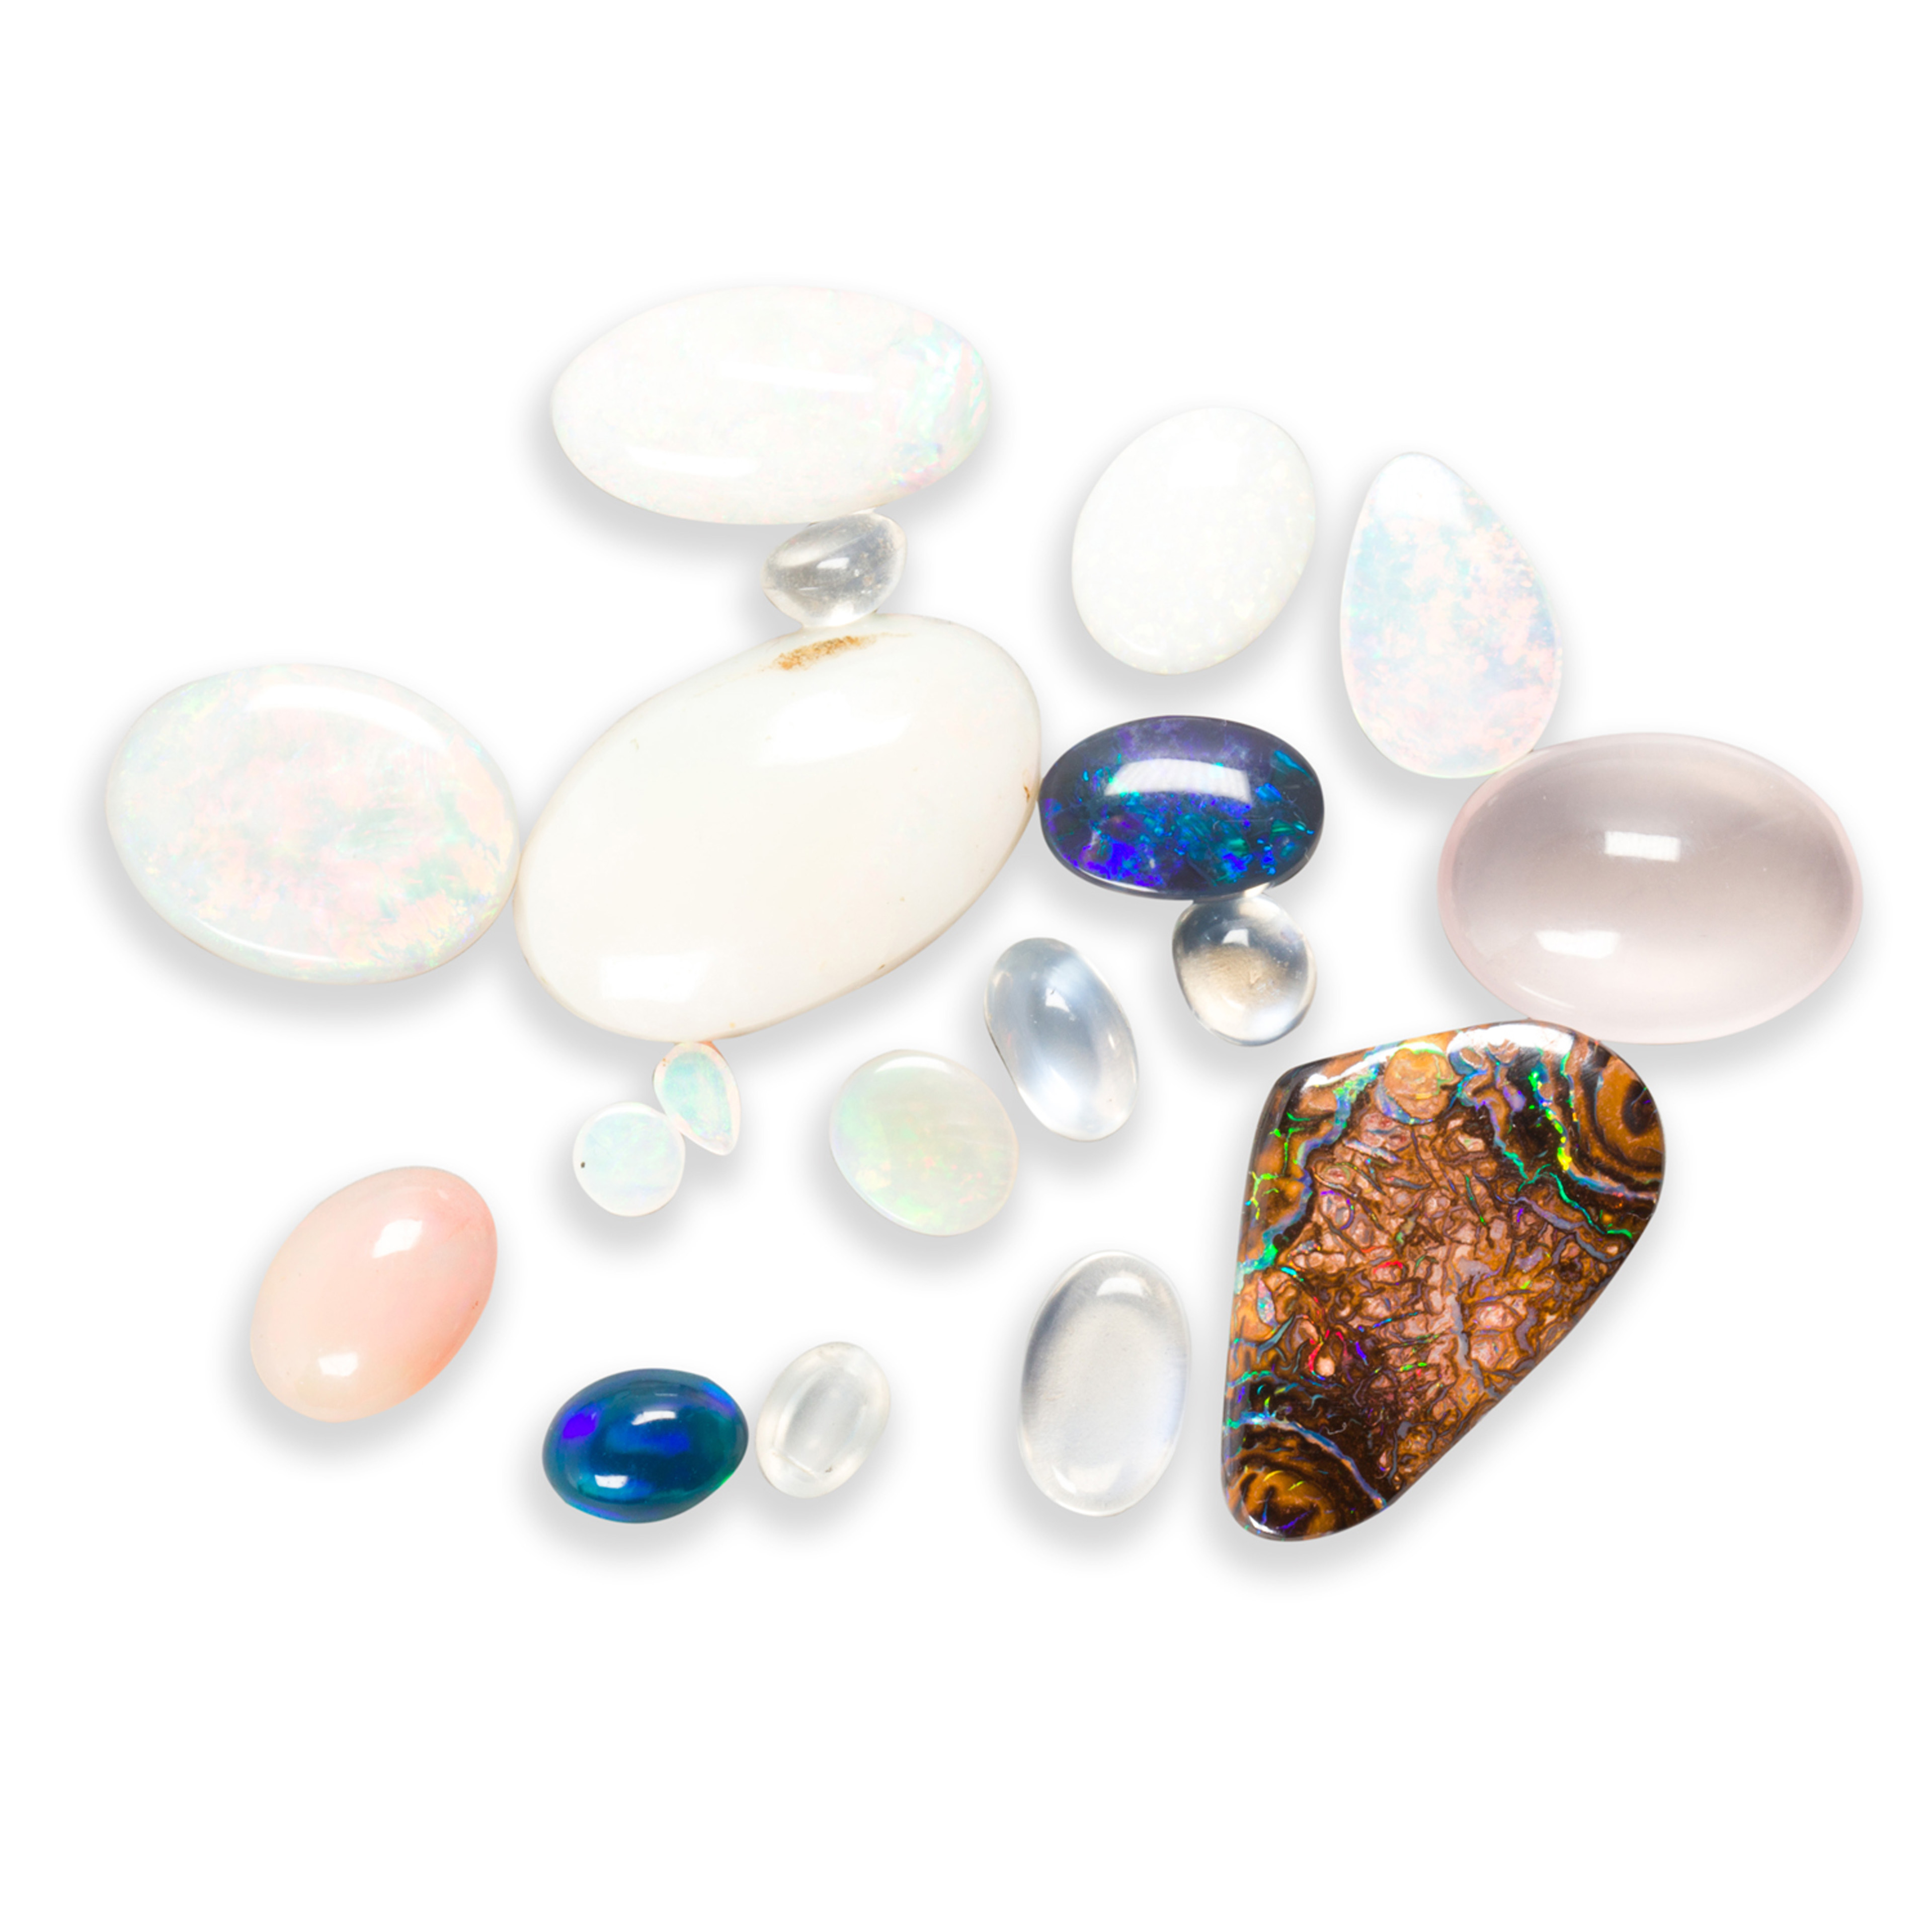 A GROUP OF UNMOUNTED OPALS OR MOONSTONES 3a4c34